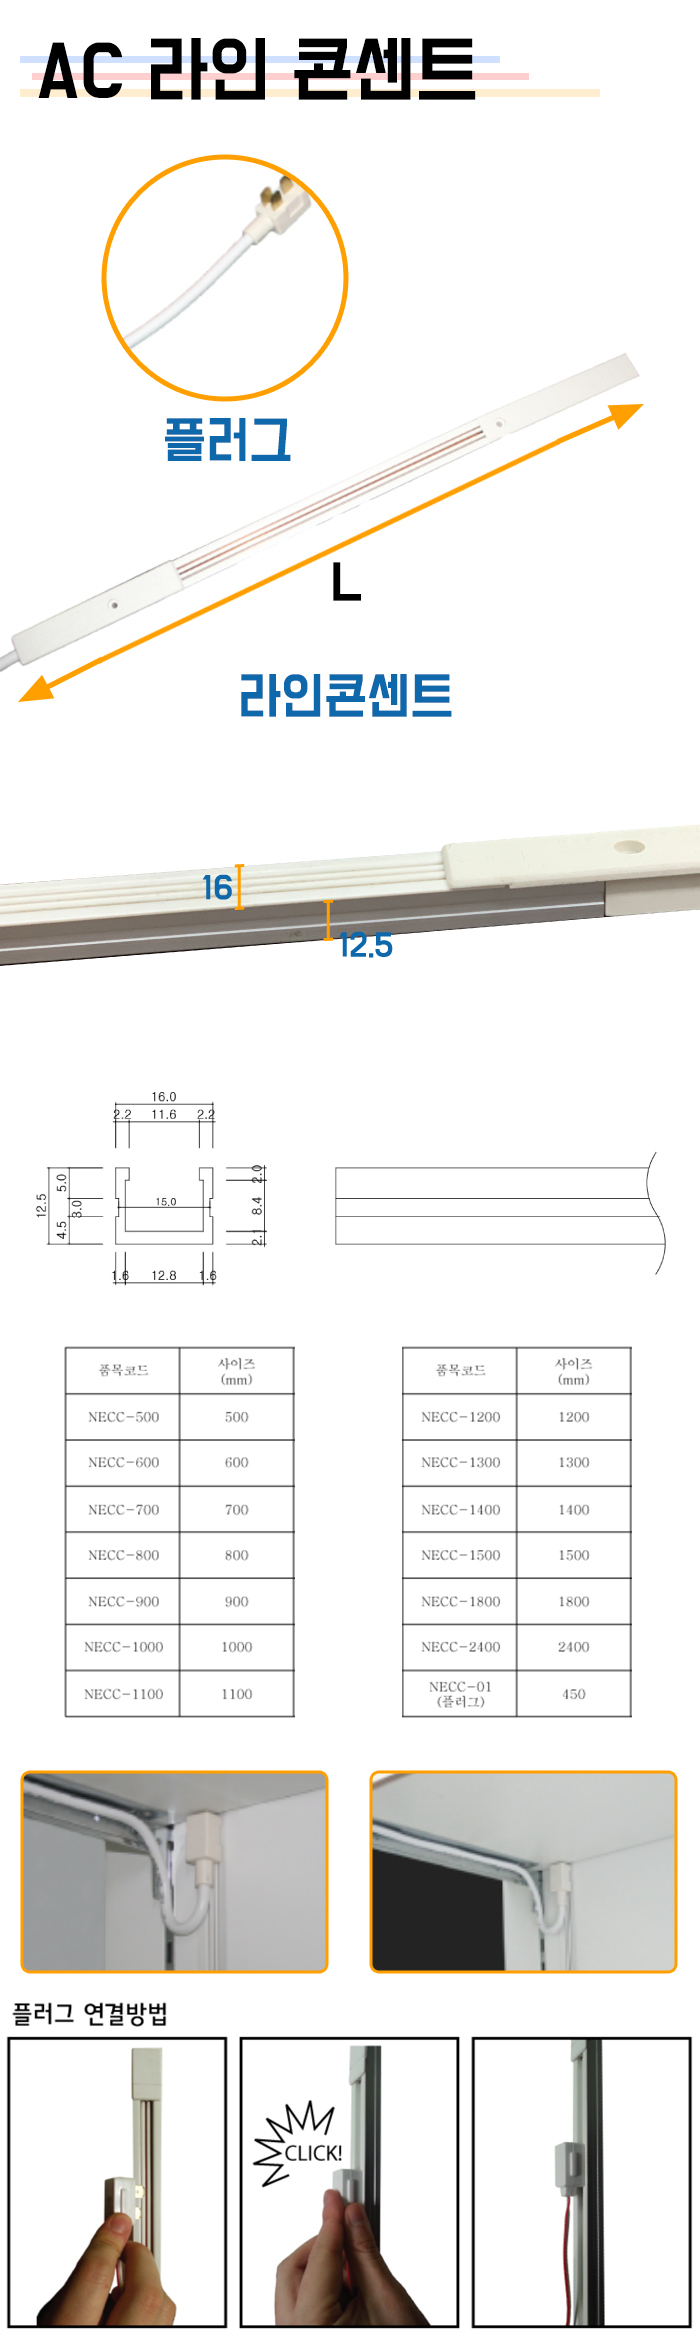 Linear Outlet_AC Type